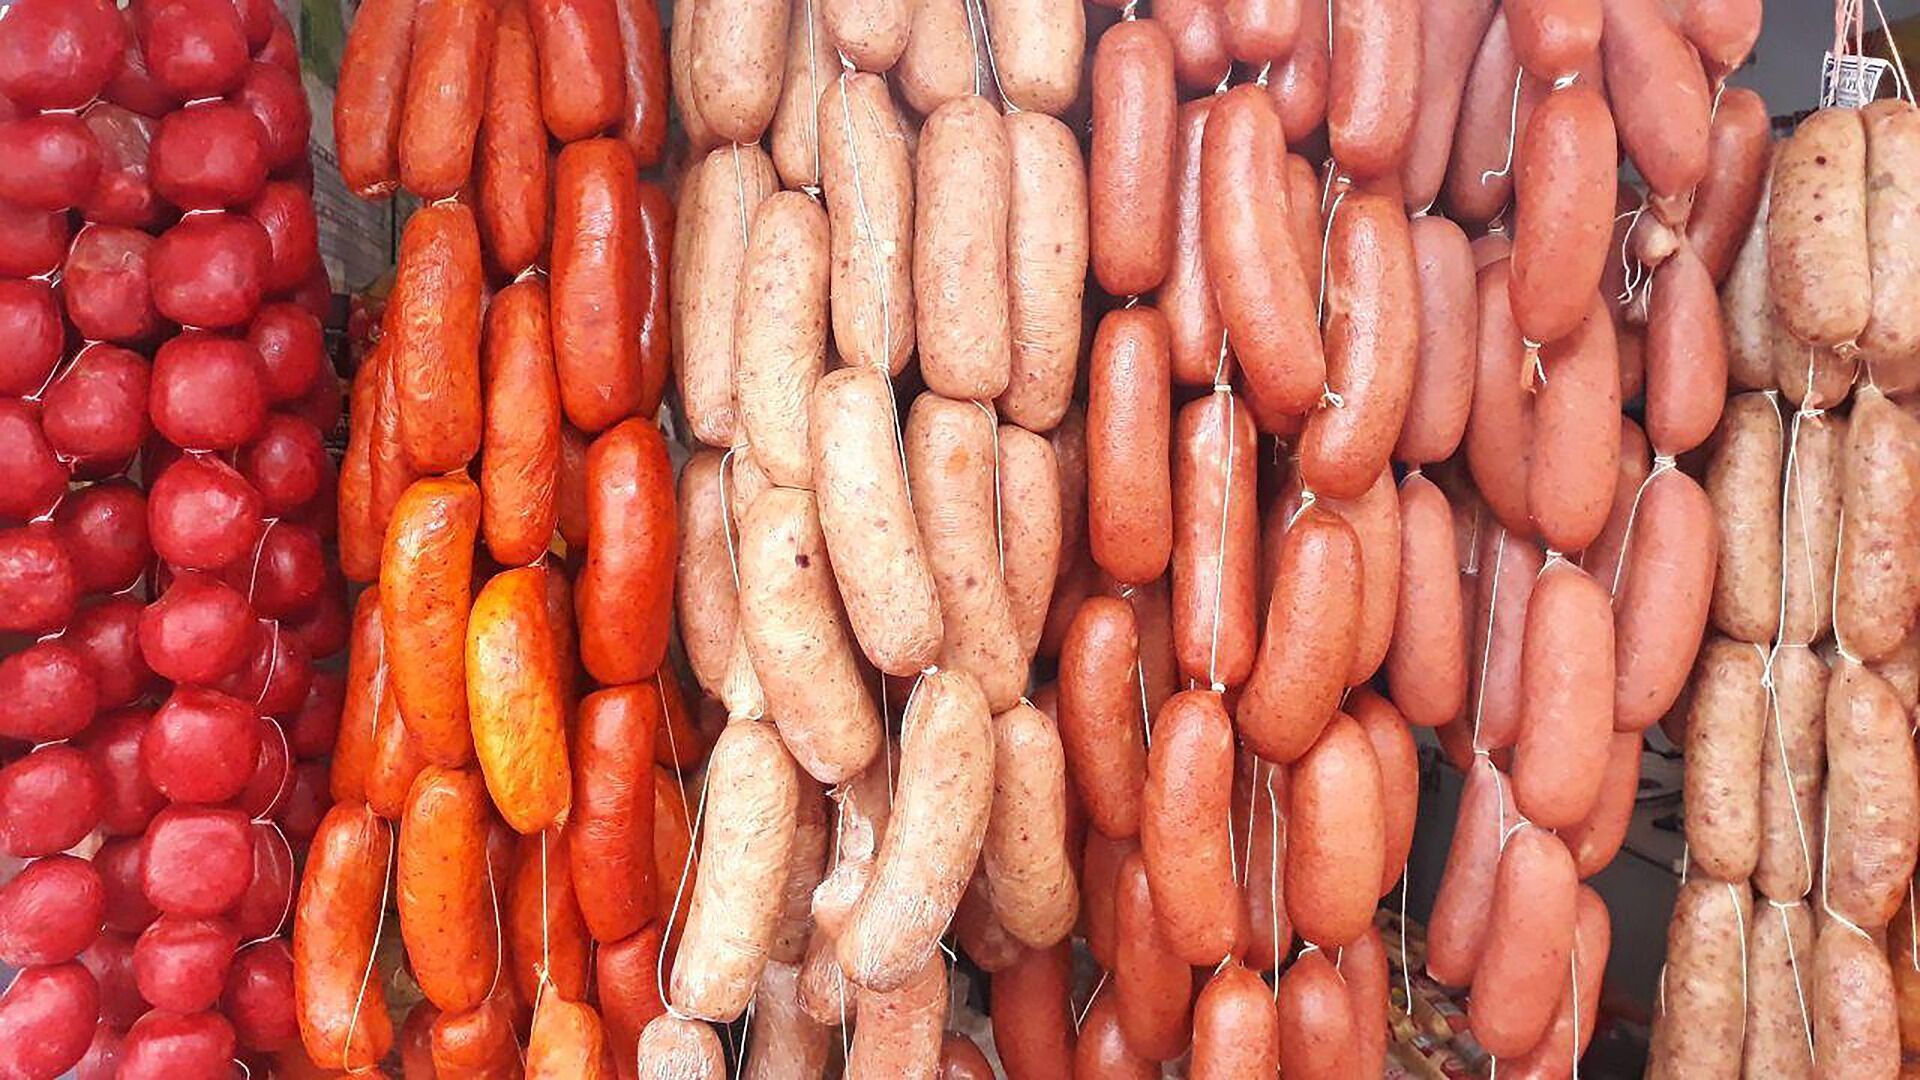 Store-bought sausages